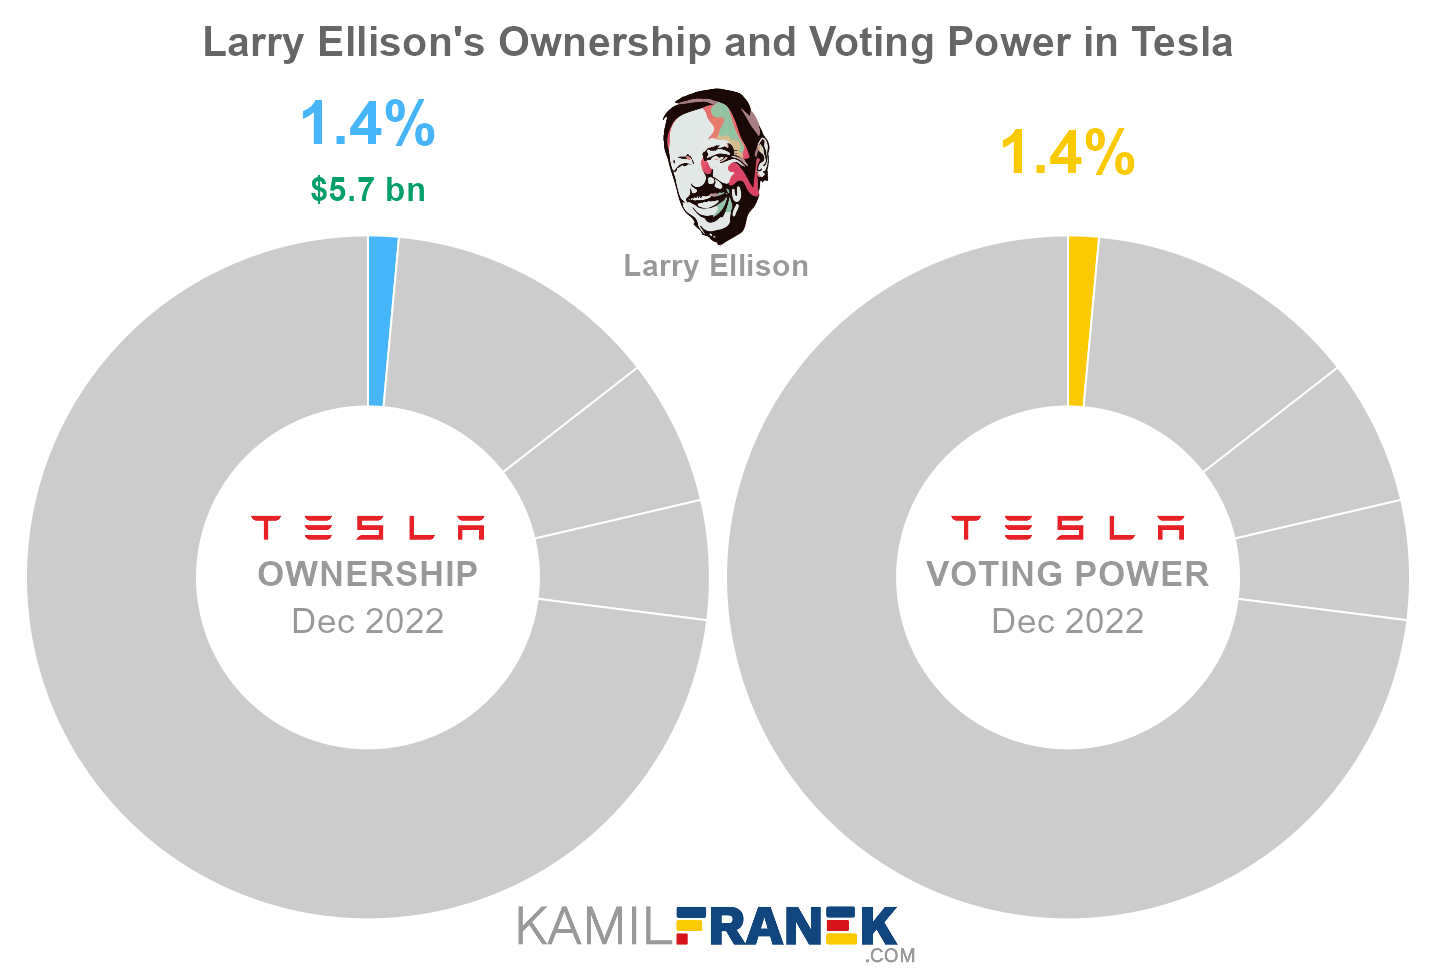 Larry Ellison's share ownership and voting power in Tesla (chart)